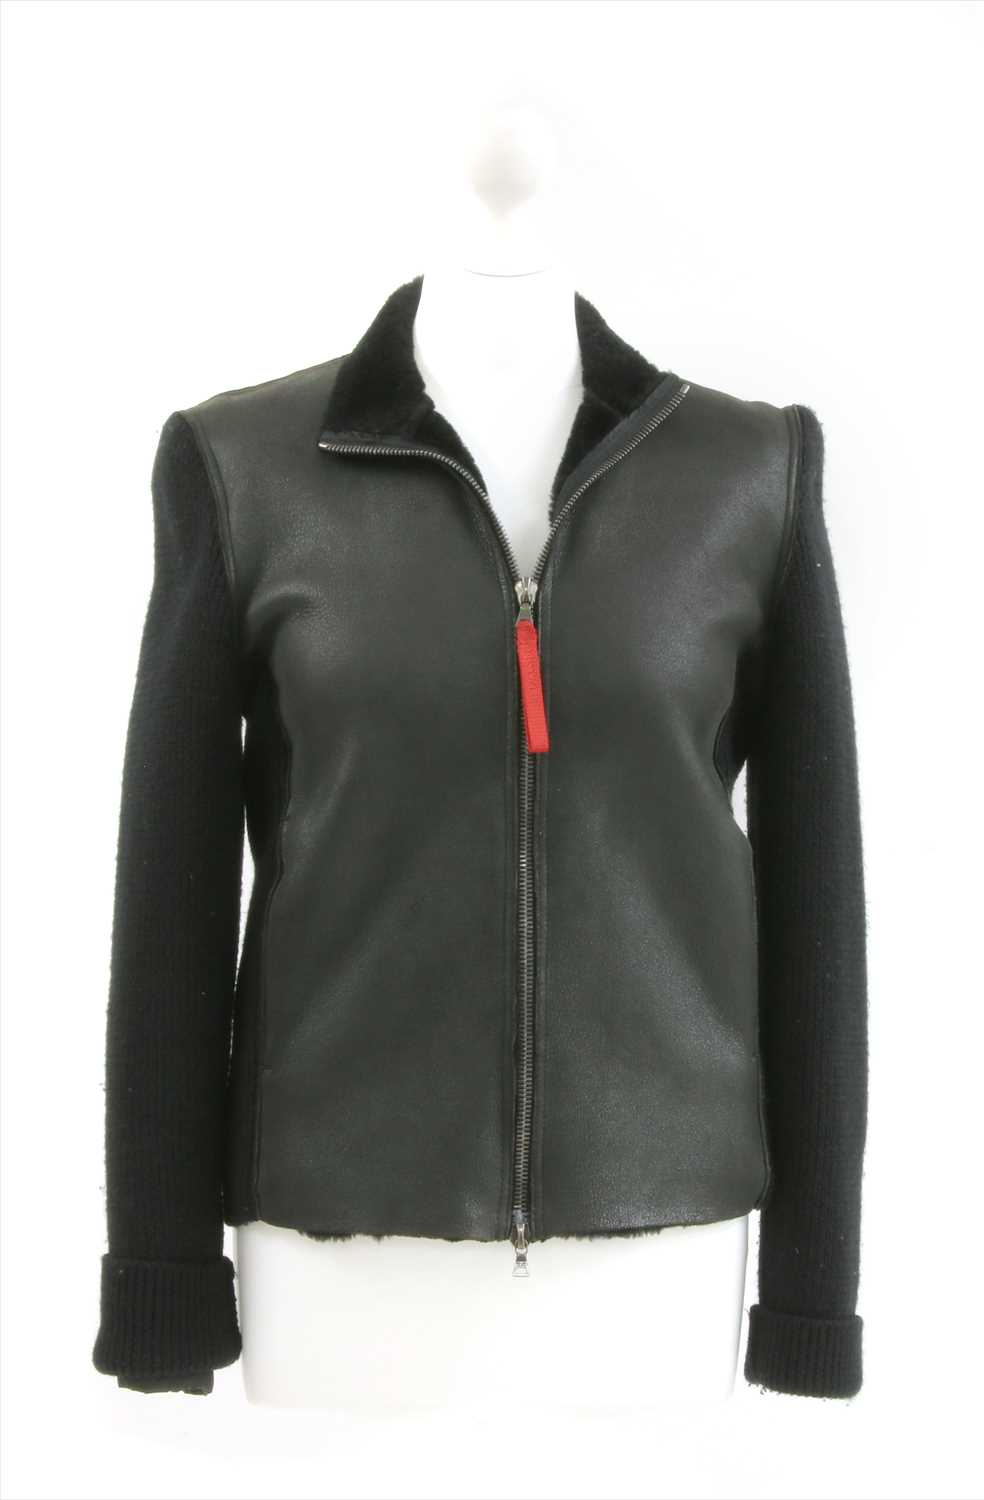 Lot 1095 - A Prada zip-up jumper with front leather panels